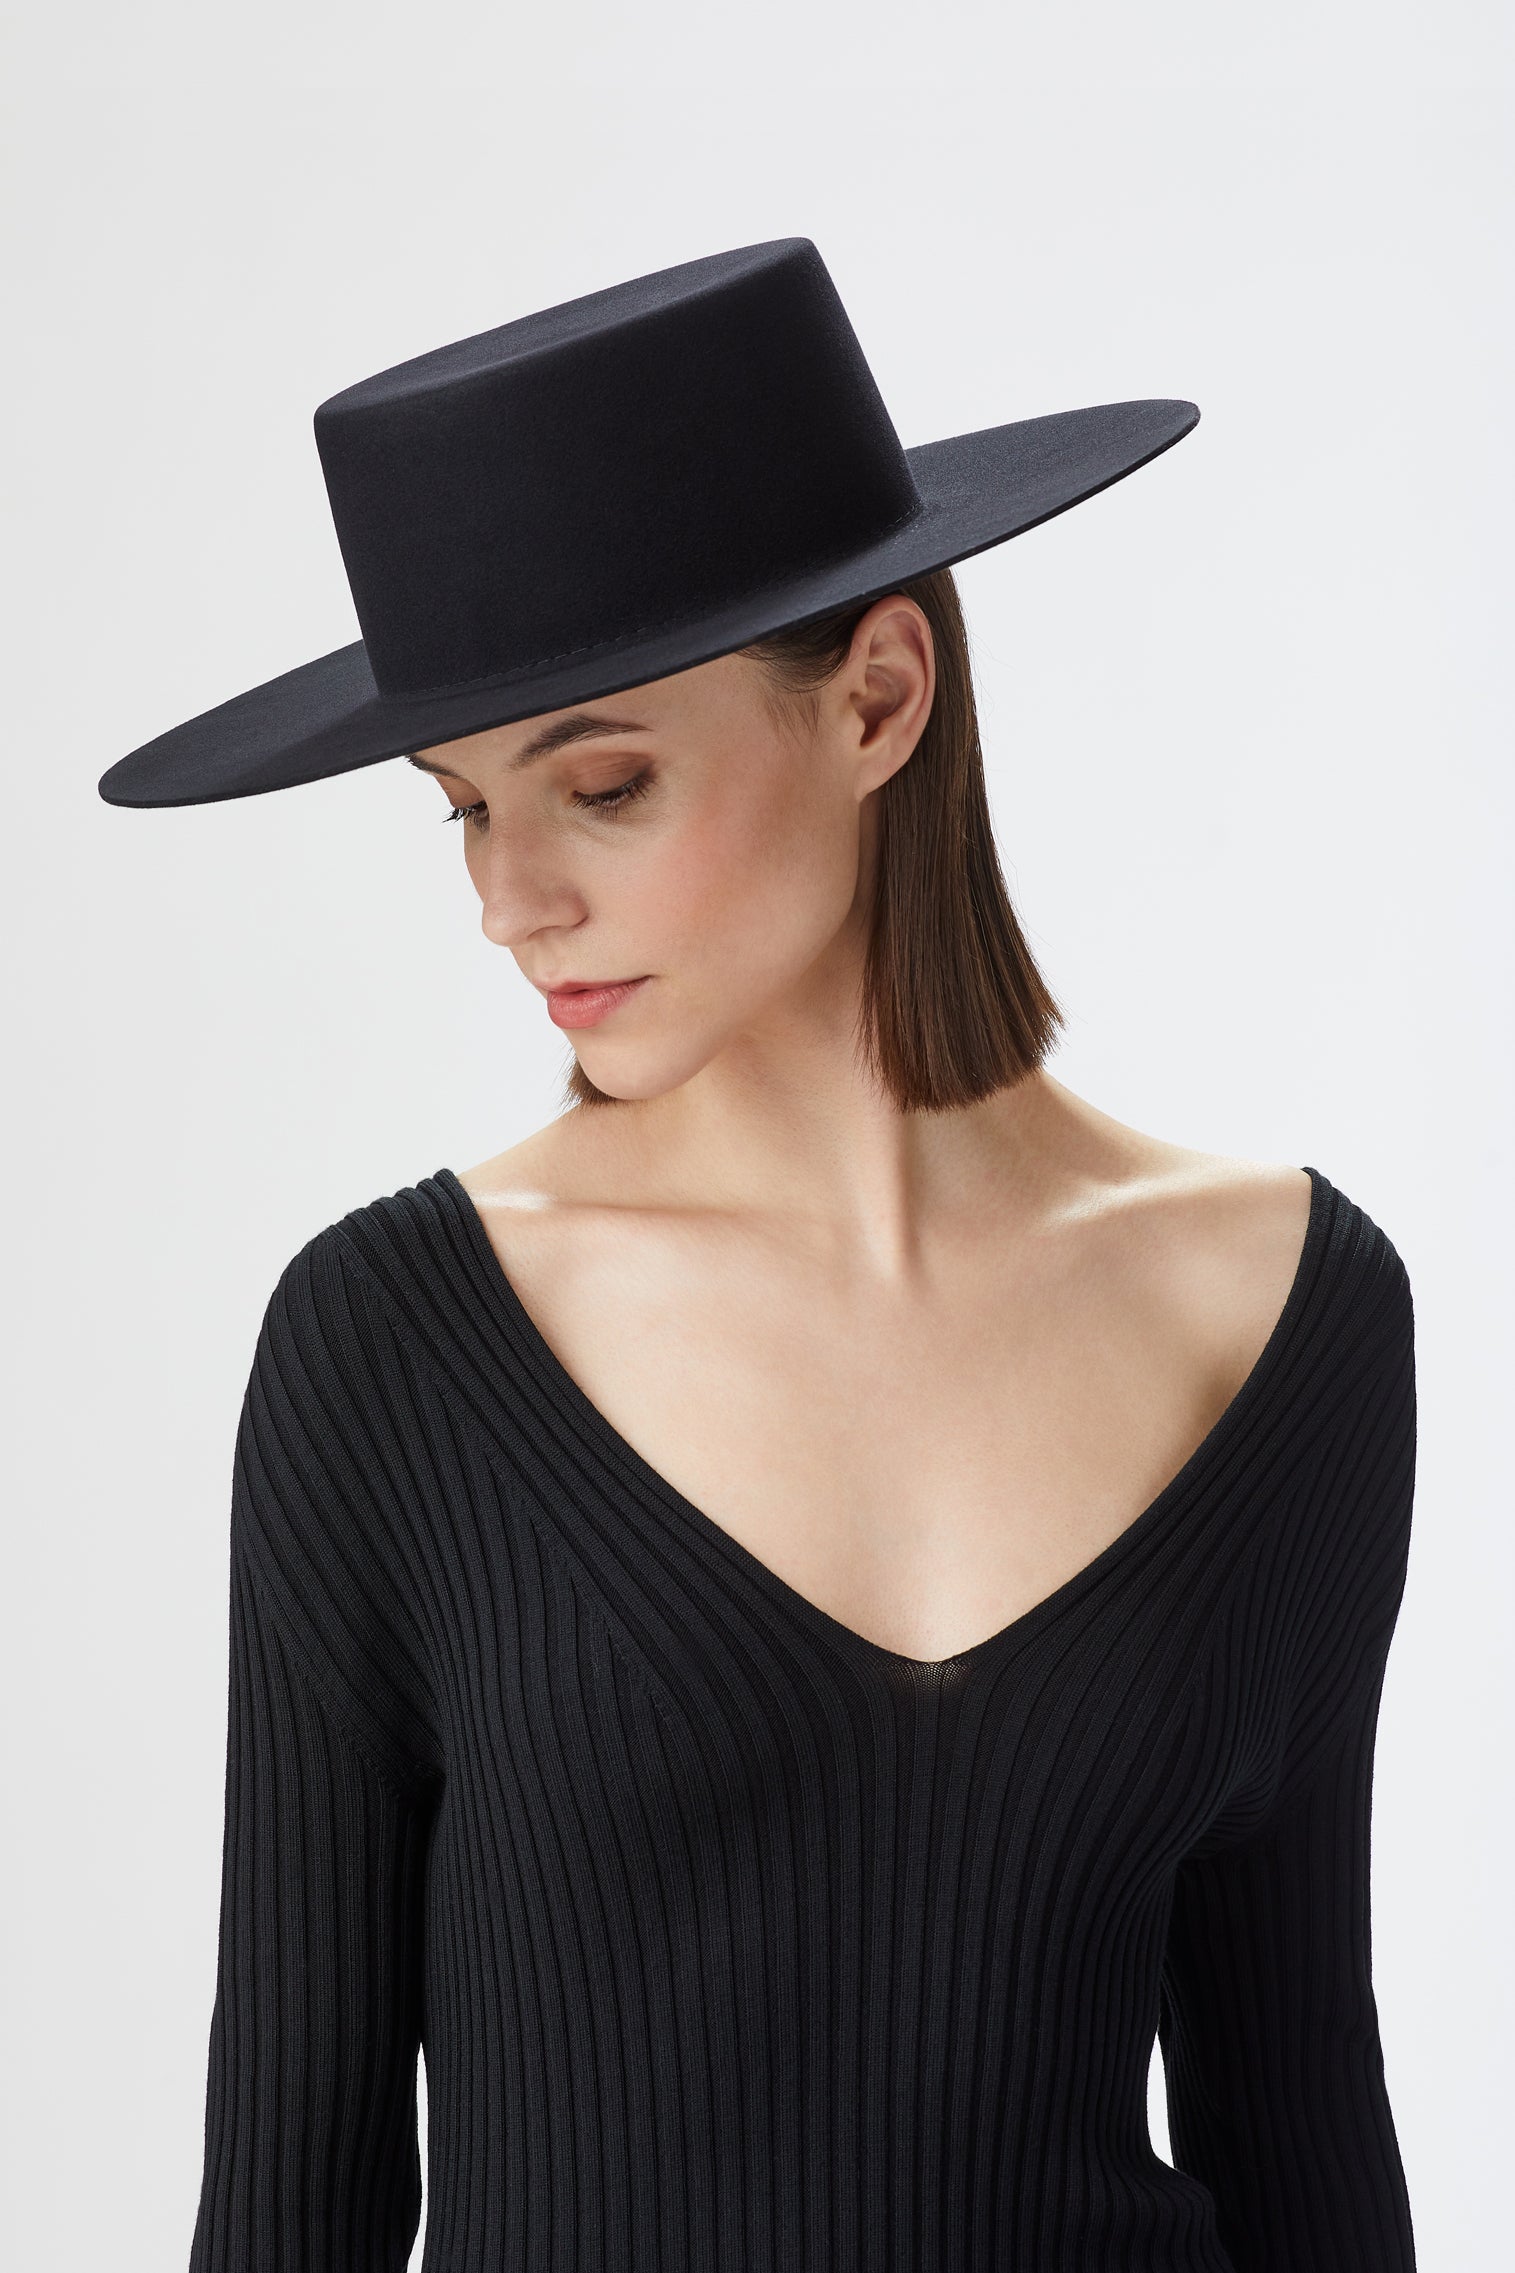 Women's Hats - Elegant Hats for Any Occasion - Lock & Co.